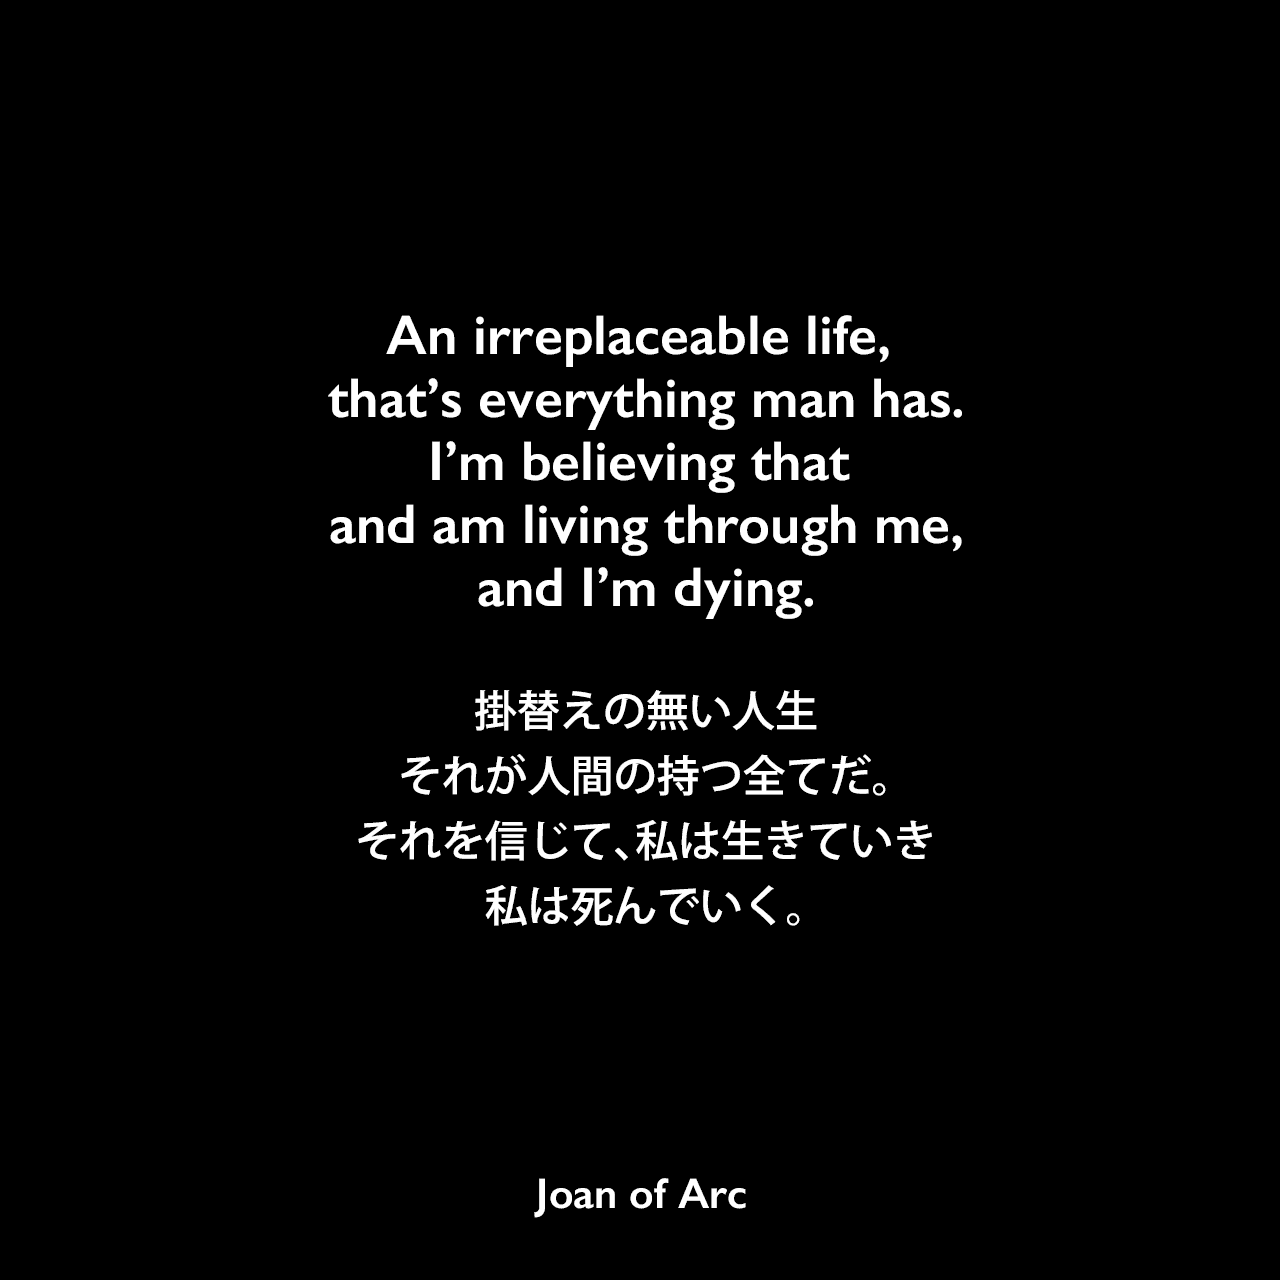 An irreplaceable life, that’s everything man has. I’m believing that and am living through me, and I’m dying.掛替えの無い人生、それが人間の持つ全てだ。それを信じて、私は生きていき、私は死んでいく。Joan of Arc